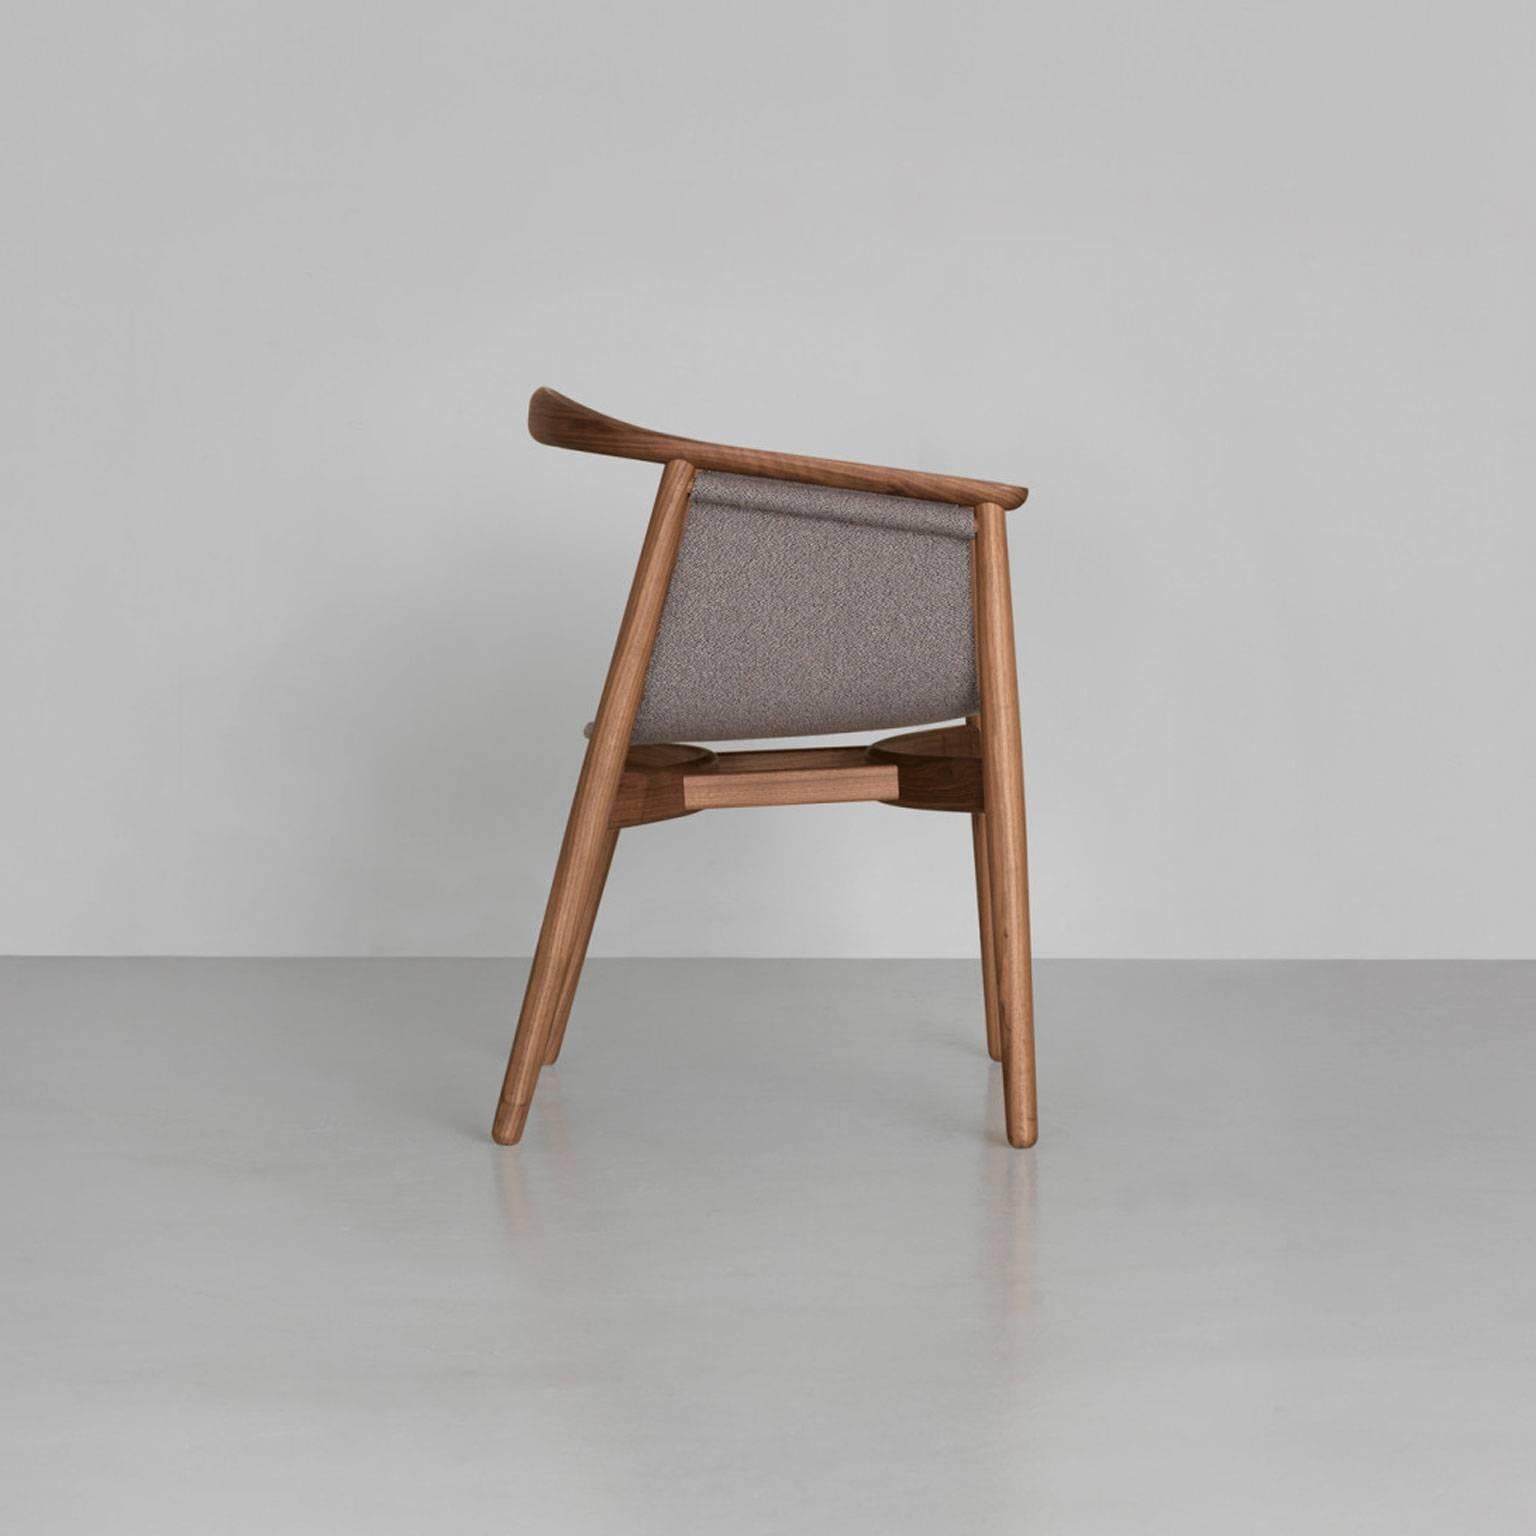 Pelle an homage to Scandinavian classics
The special thing about Pelle: Its freely hanging seat made from core leather. It is also refined in the leather-bound aluminum inlay used for the shaping of the seat. This solution stabilizes the chair